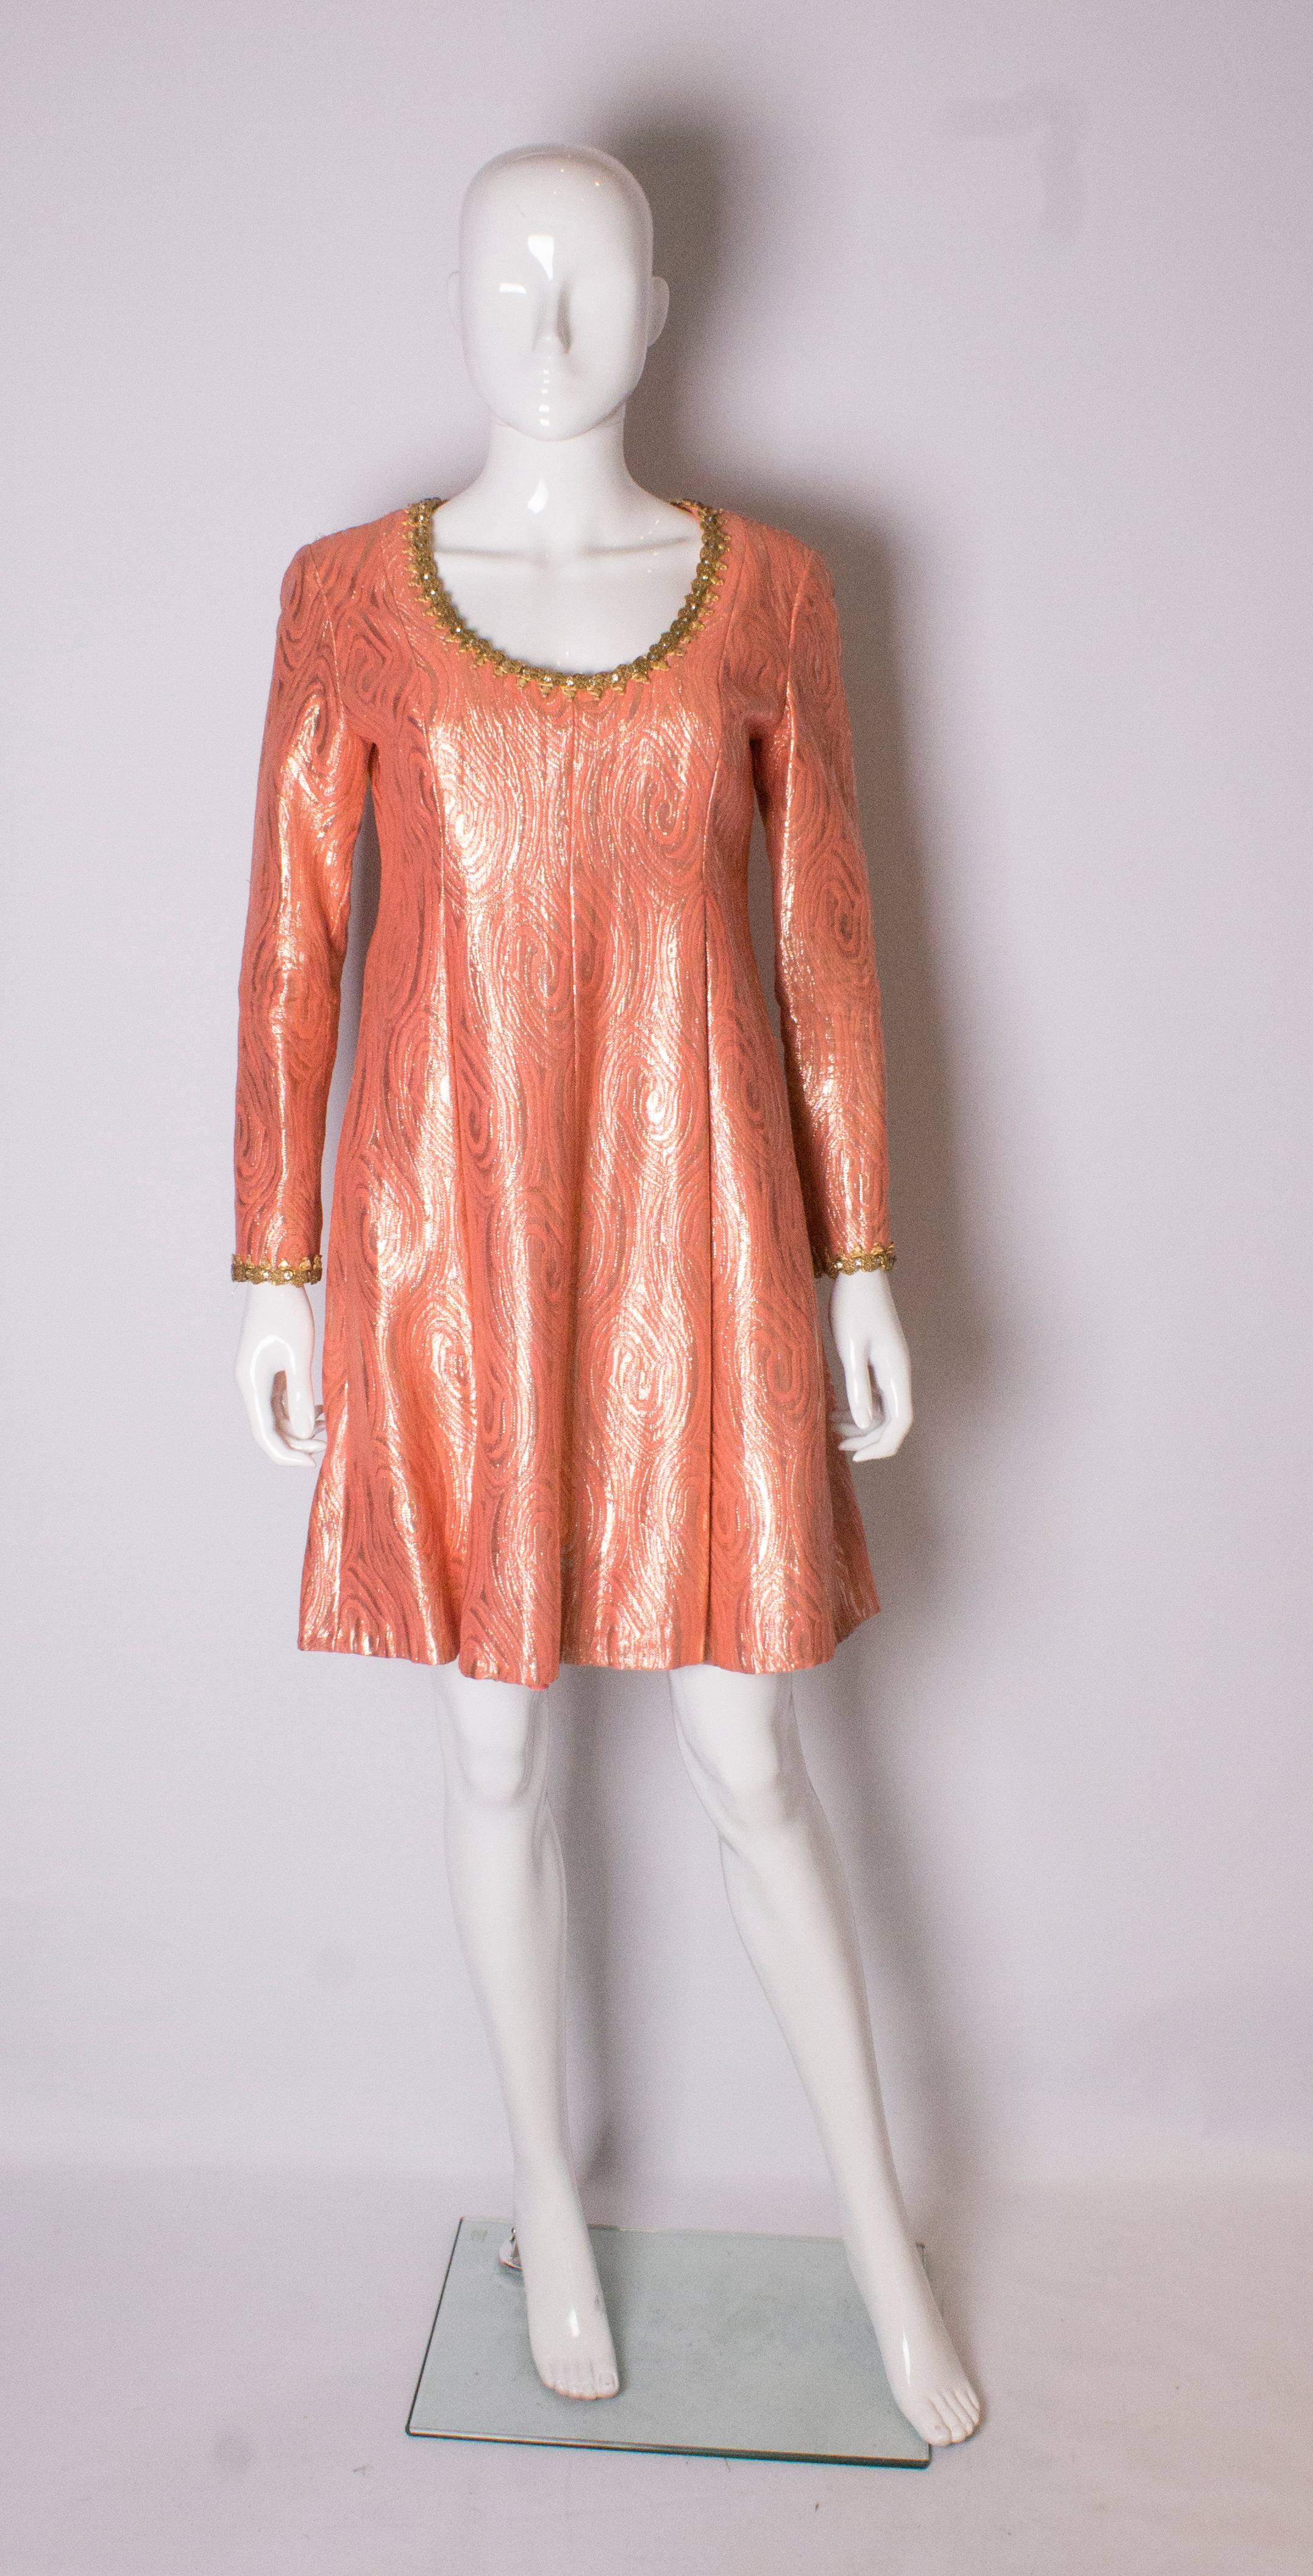 A great dress by  Oscar de la Renta. The dress is in a colourful combination of soft golds and tangerine with beautiful braiding on the neckline and cuffs. The dress has a scoop neckline, central back zip and is fully lined.  It has pleats at the